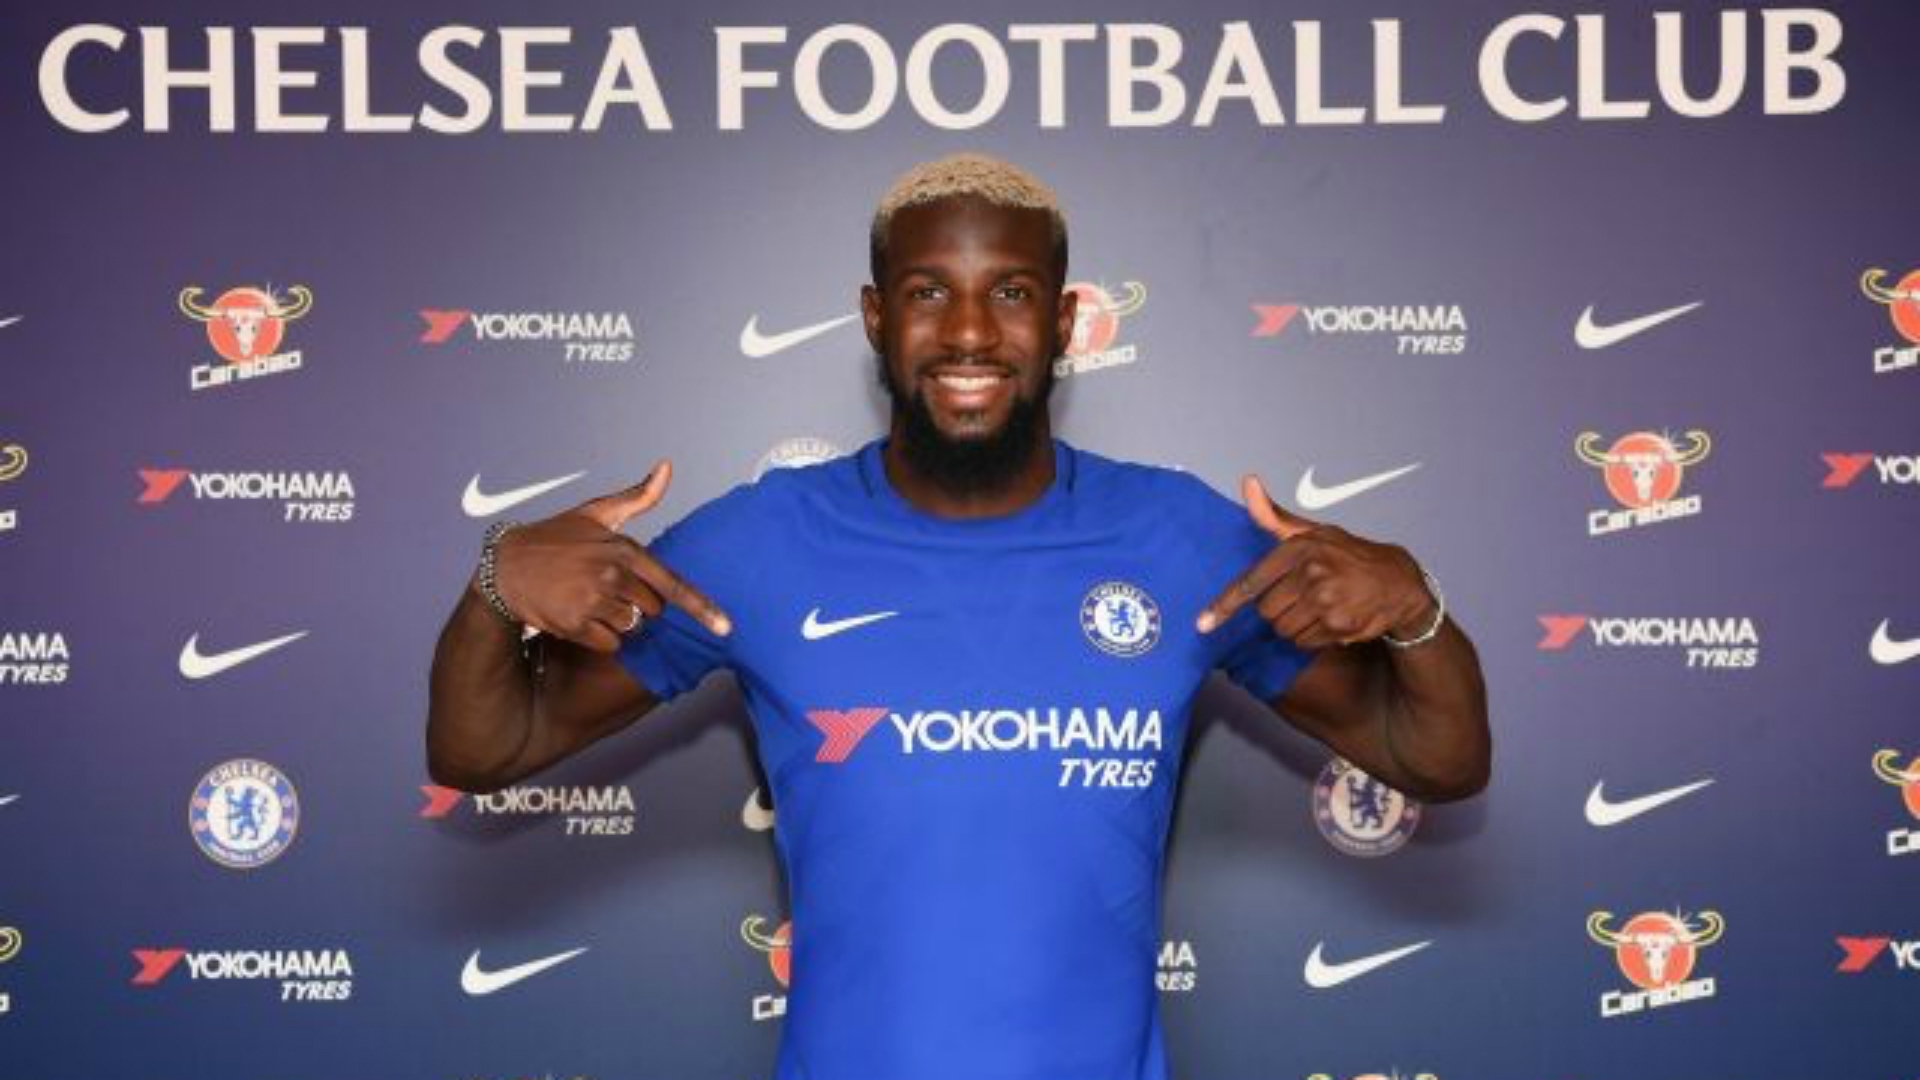 Tiemoue Bakayoko joins Chelsea from French side Monaco and manager Antonio Conte is set to partner up two of the best defensive midfielders in the football today. 